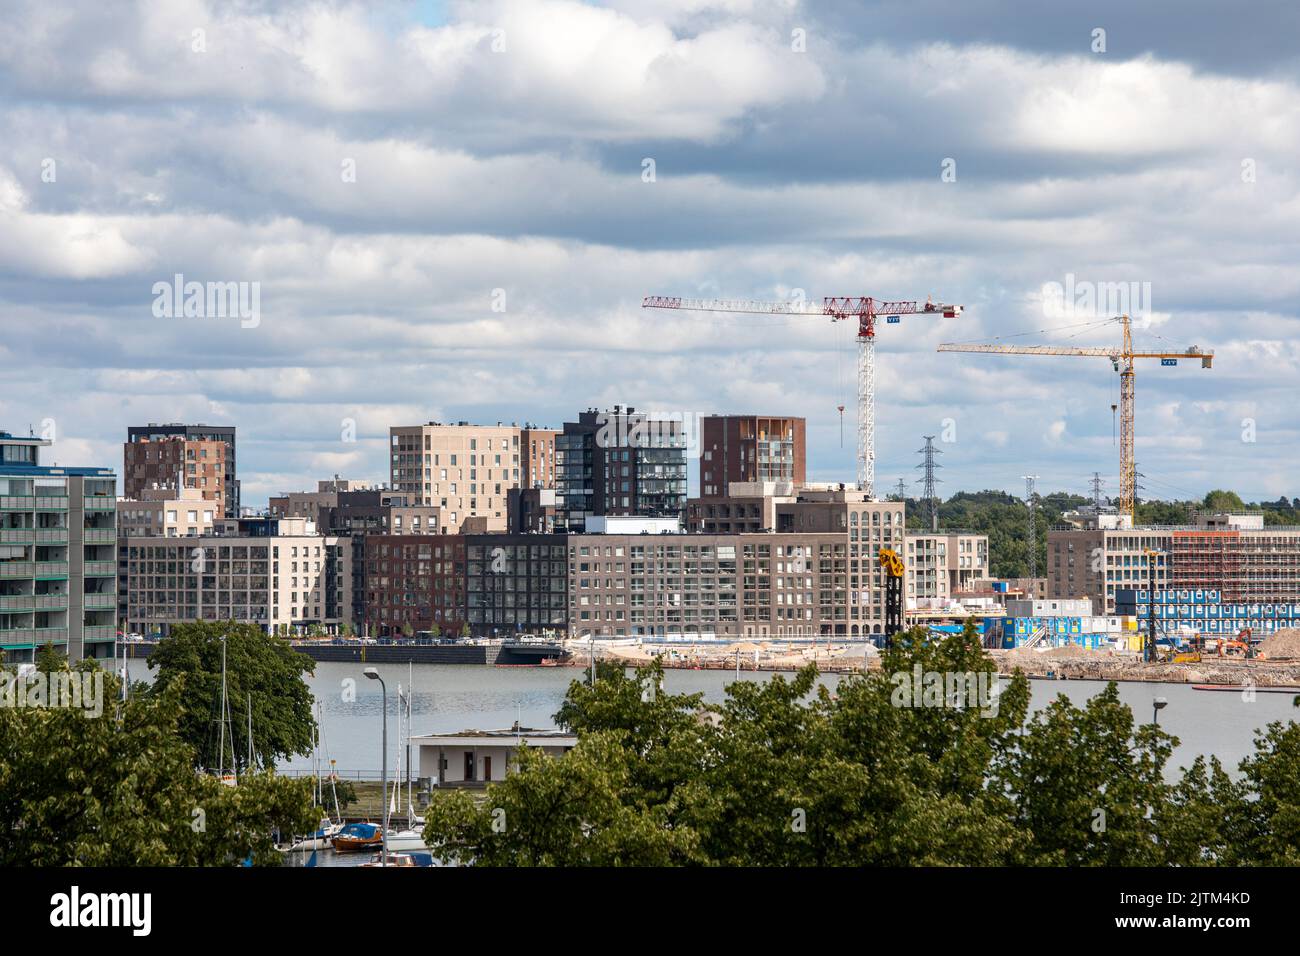 Newly built Sompasaari district by the sea in Helsinki, Finland Stock Photo